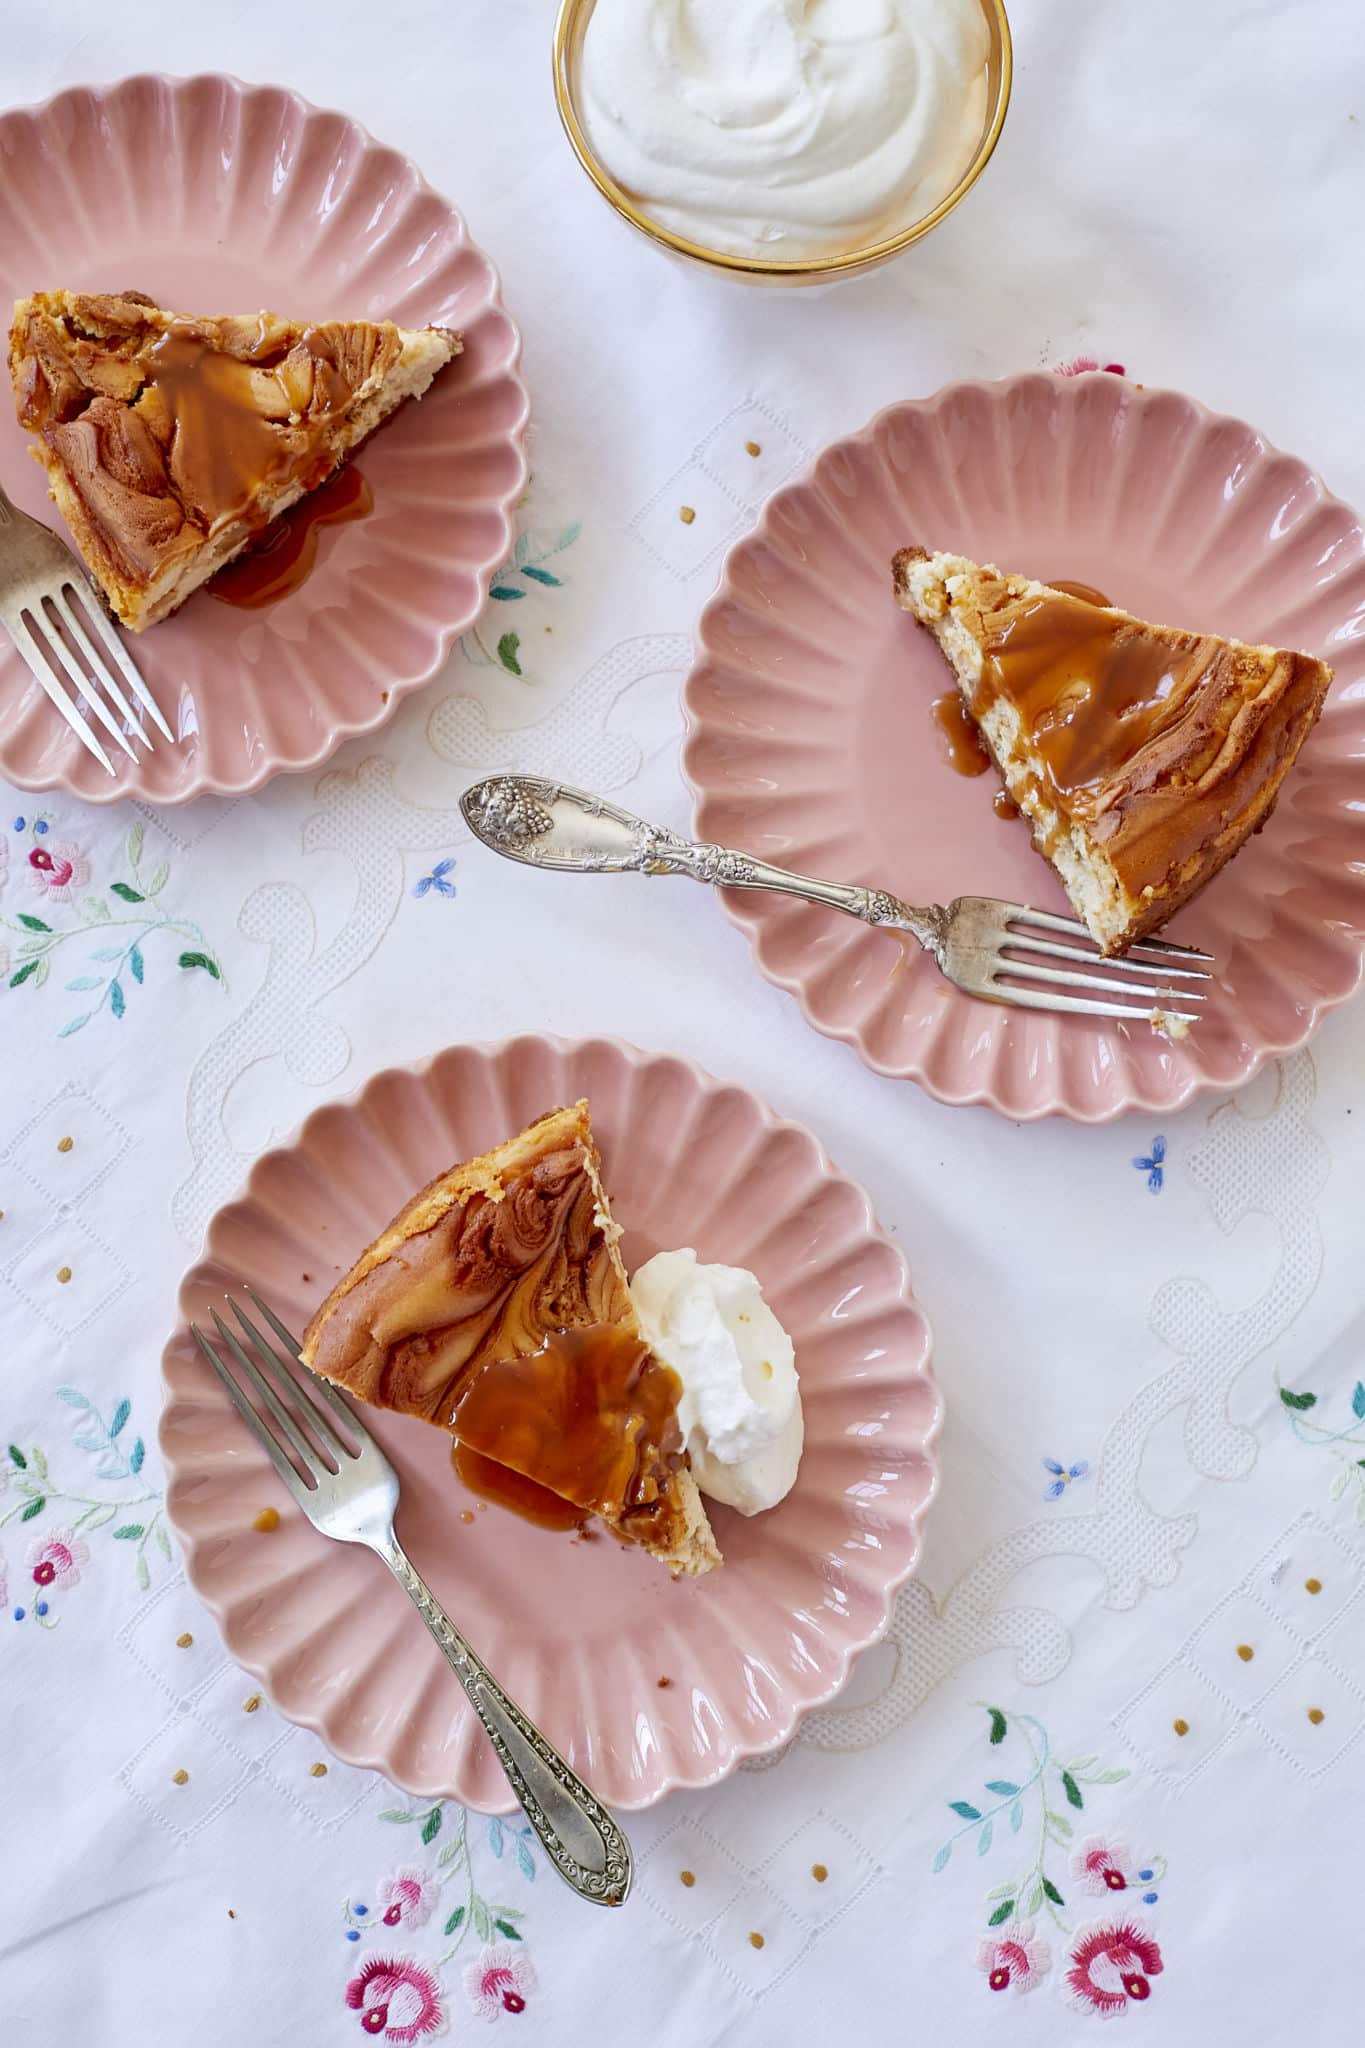 Apple Caramel Cheesecake slices are served on pink plates with homemade salted caramel sauce and whipped cream